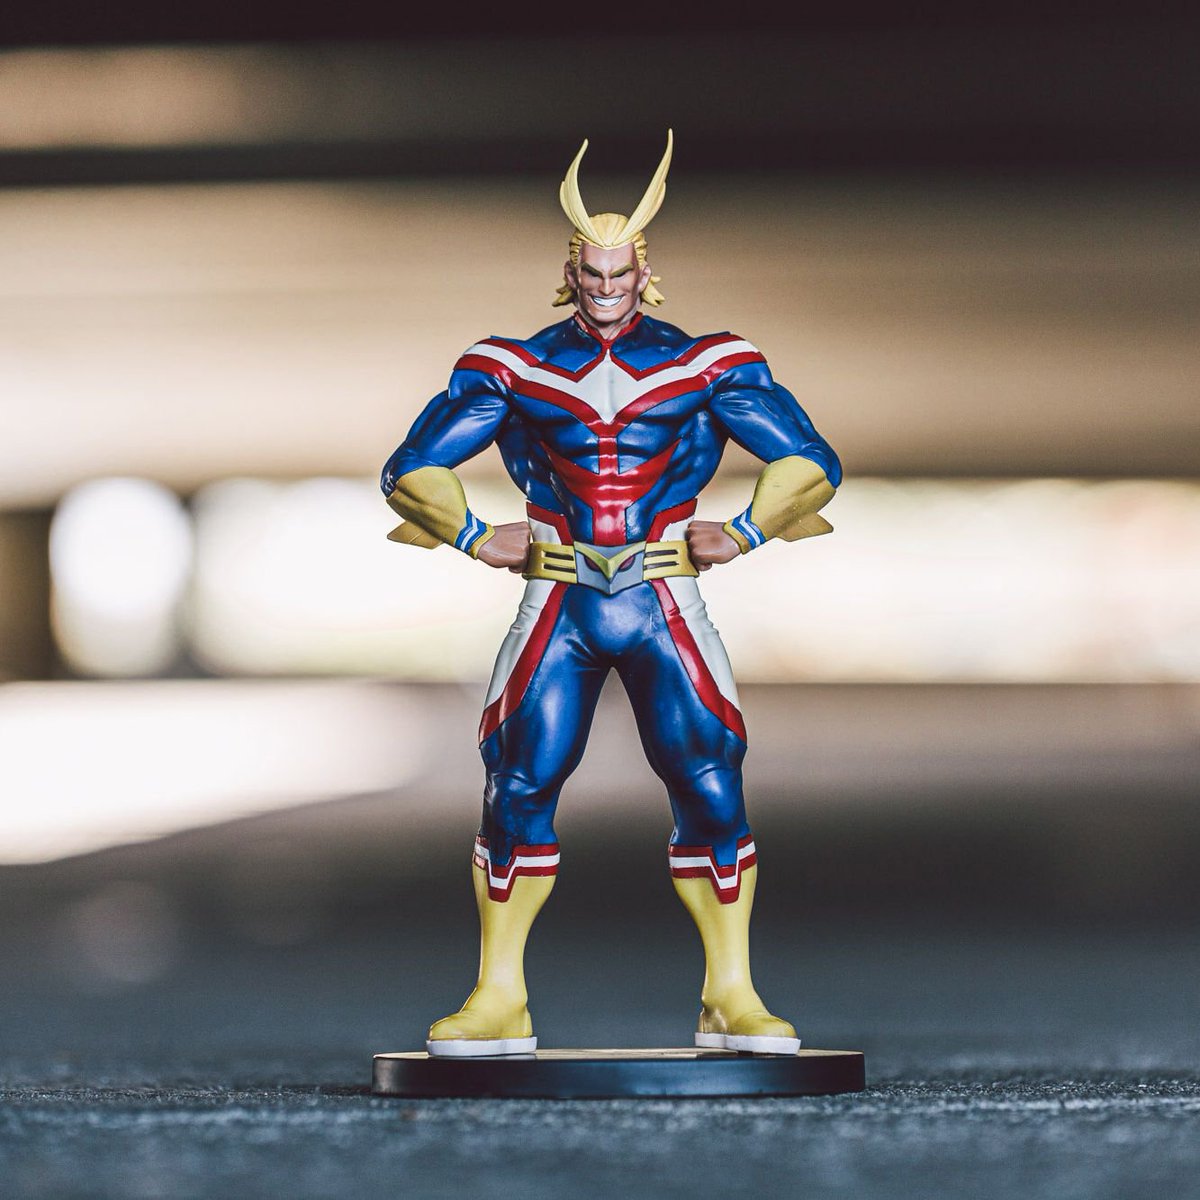 Bait The Banpresto My Hero Academia Age Of Heroes Vol 1 All Might Figure Is Available Now Online At T Co Tdhdbrzlxo T Co Spbcxc7r3b